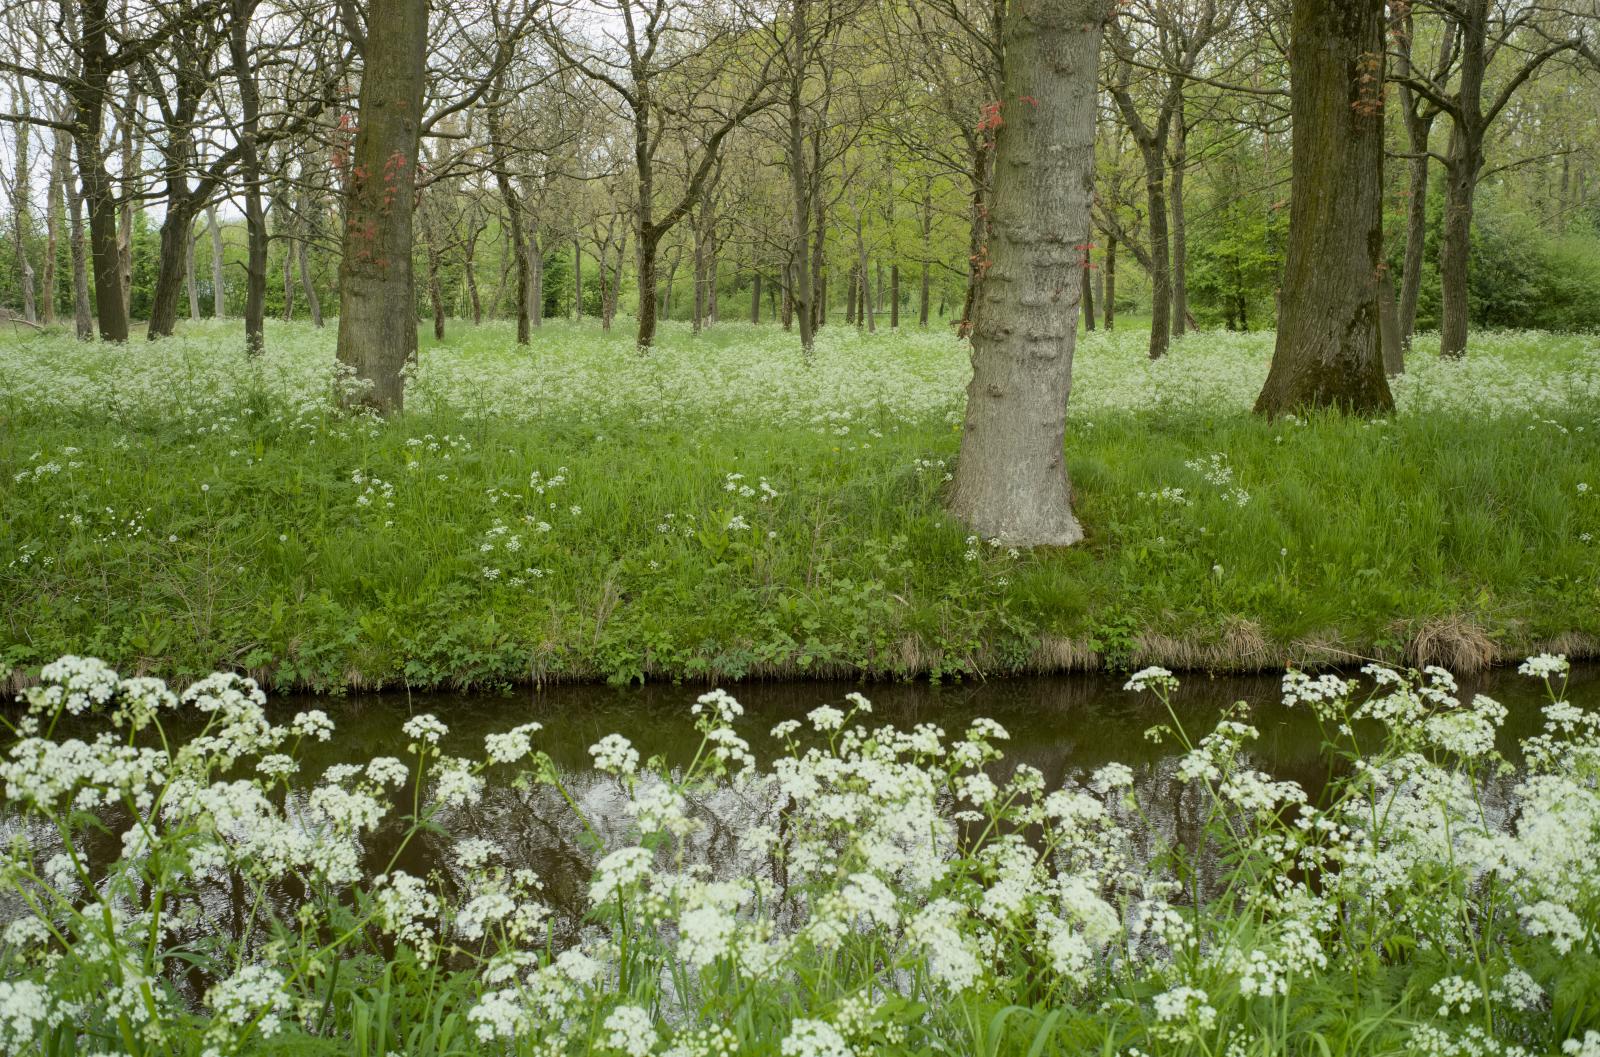 Trees and Cow Parsley | Buy this image